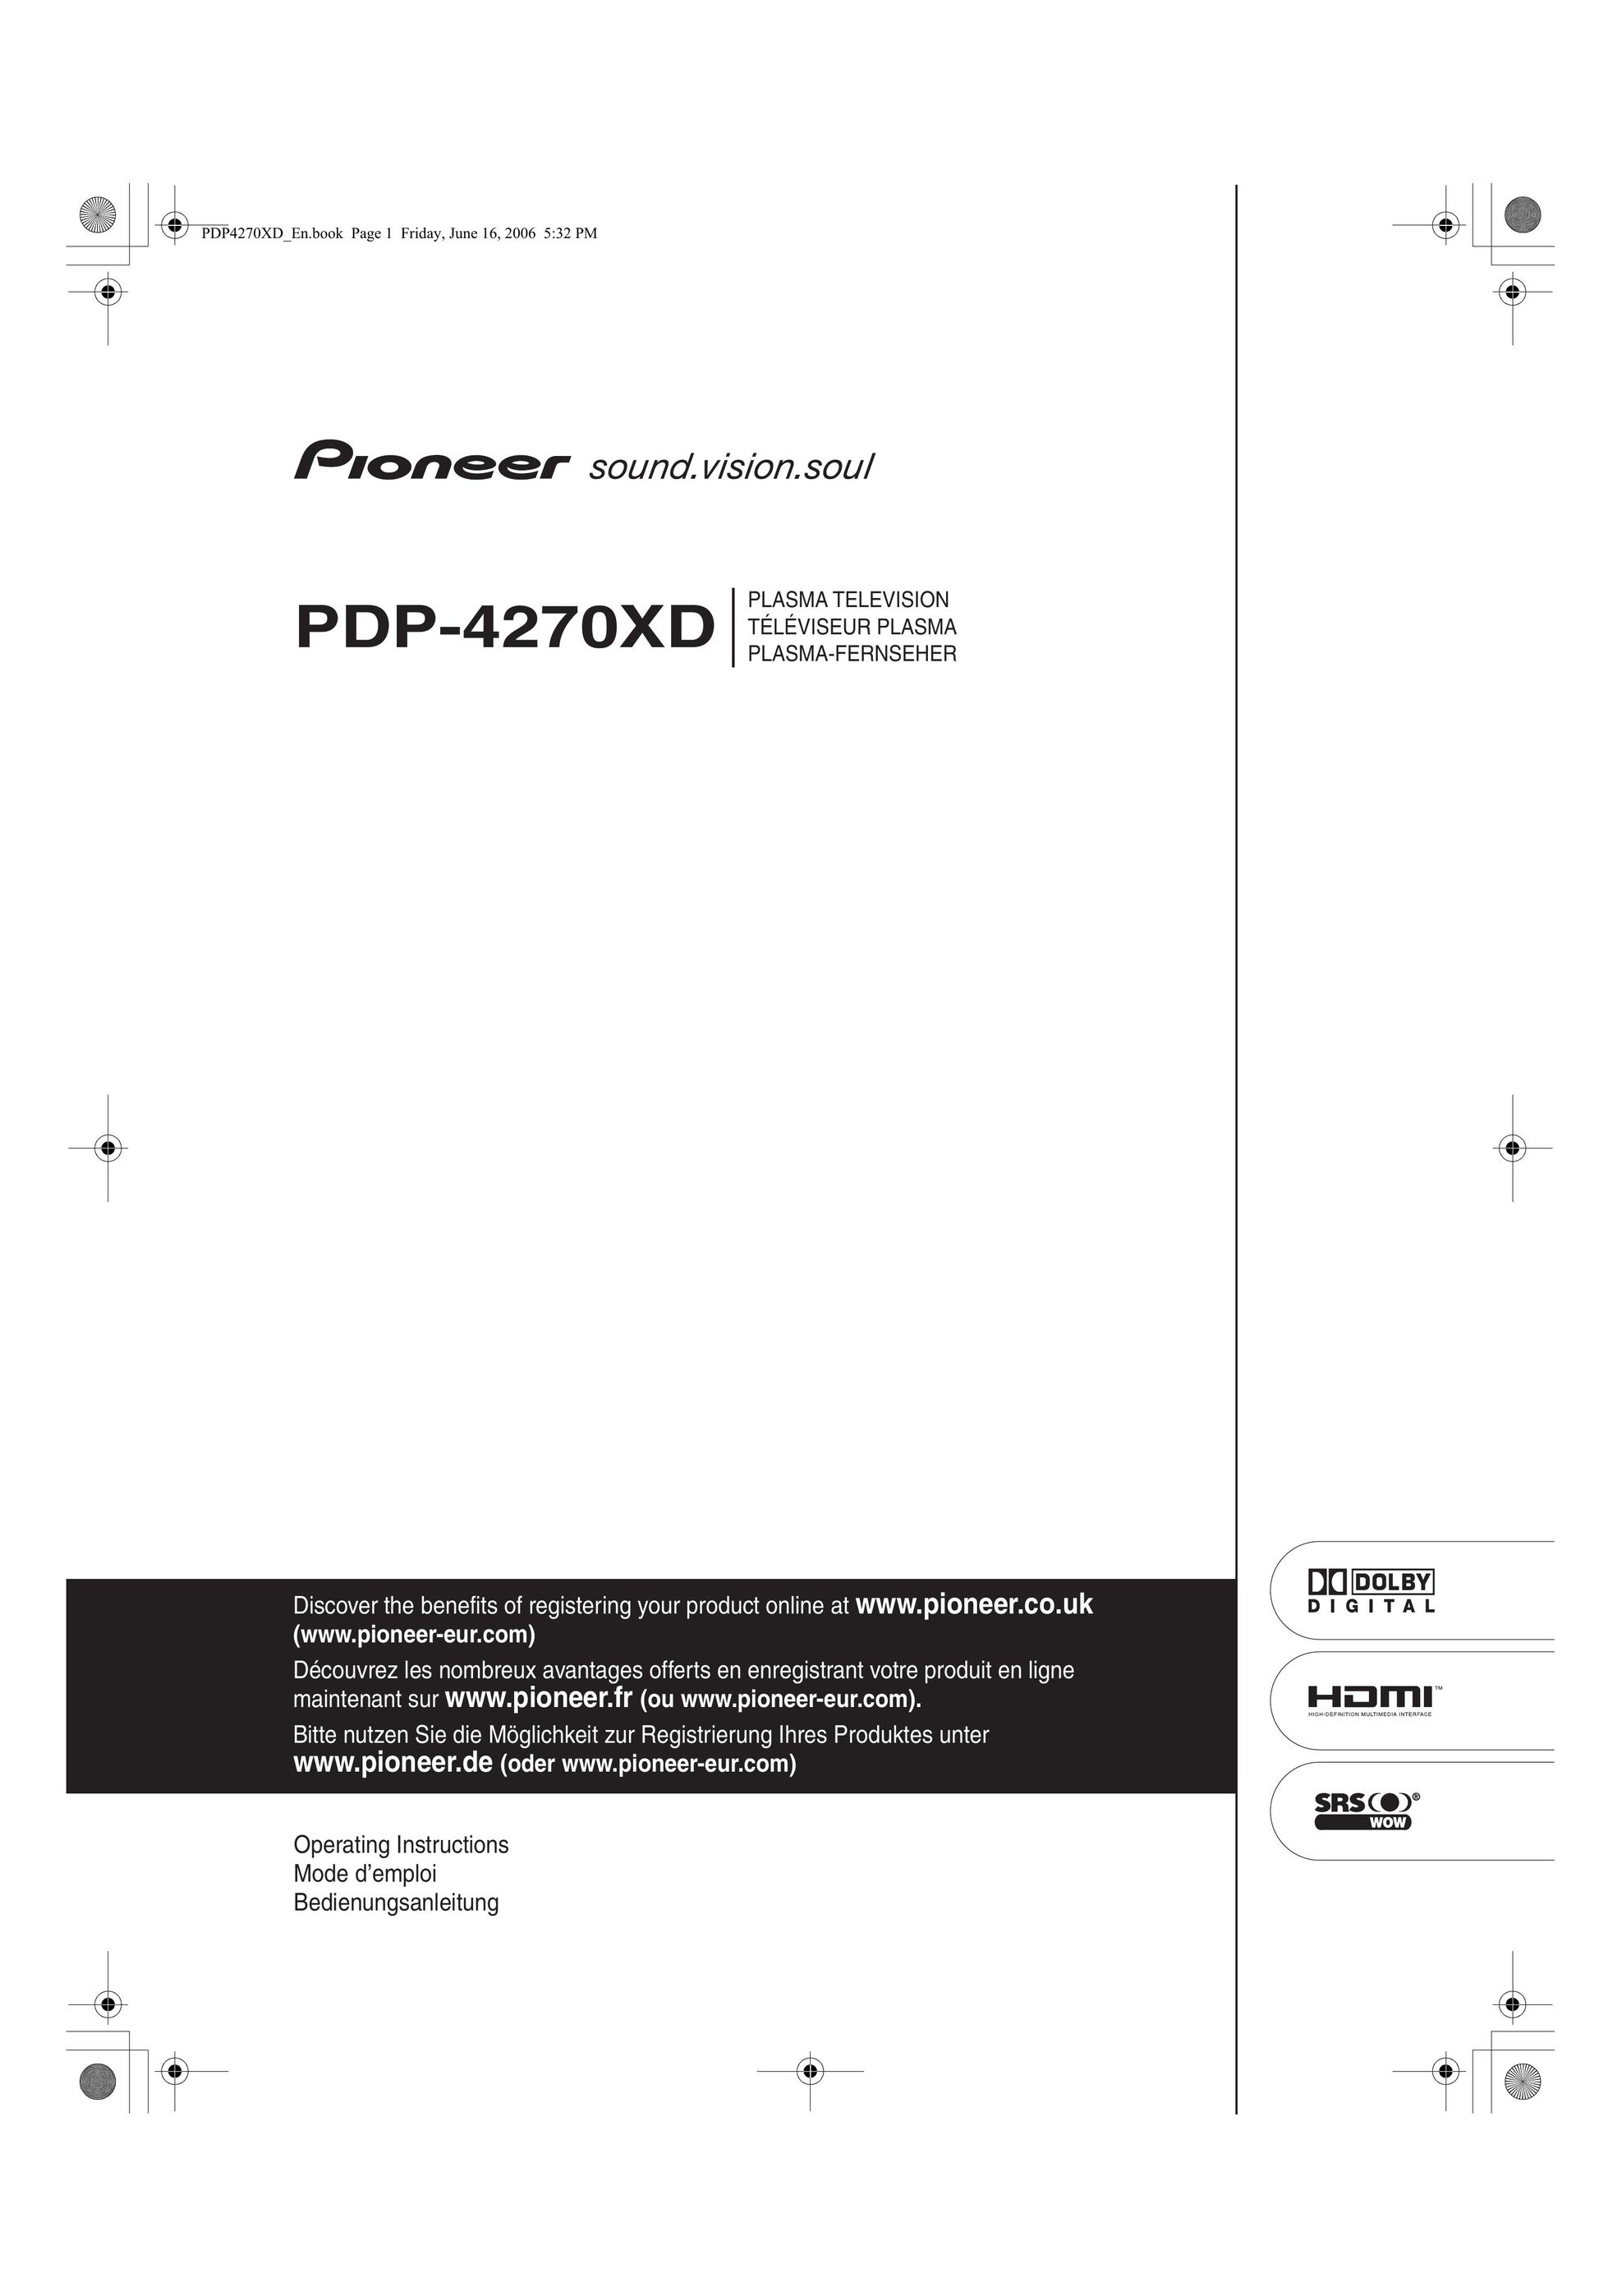 Pioneer PDP-4270XD Flat Panel Television User Manual